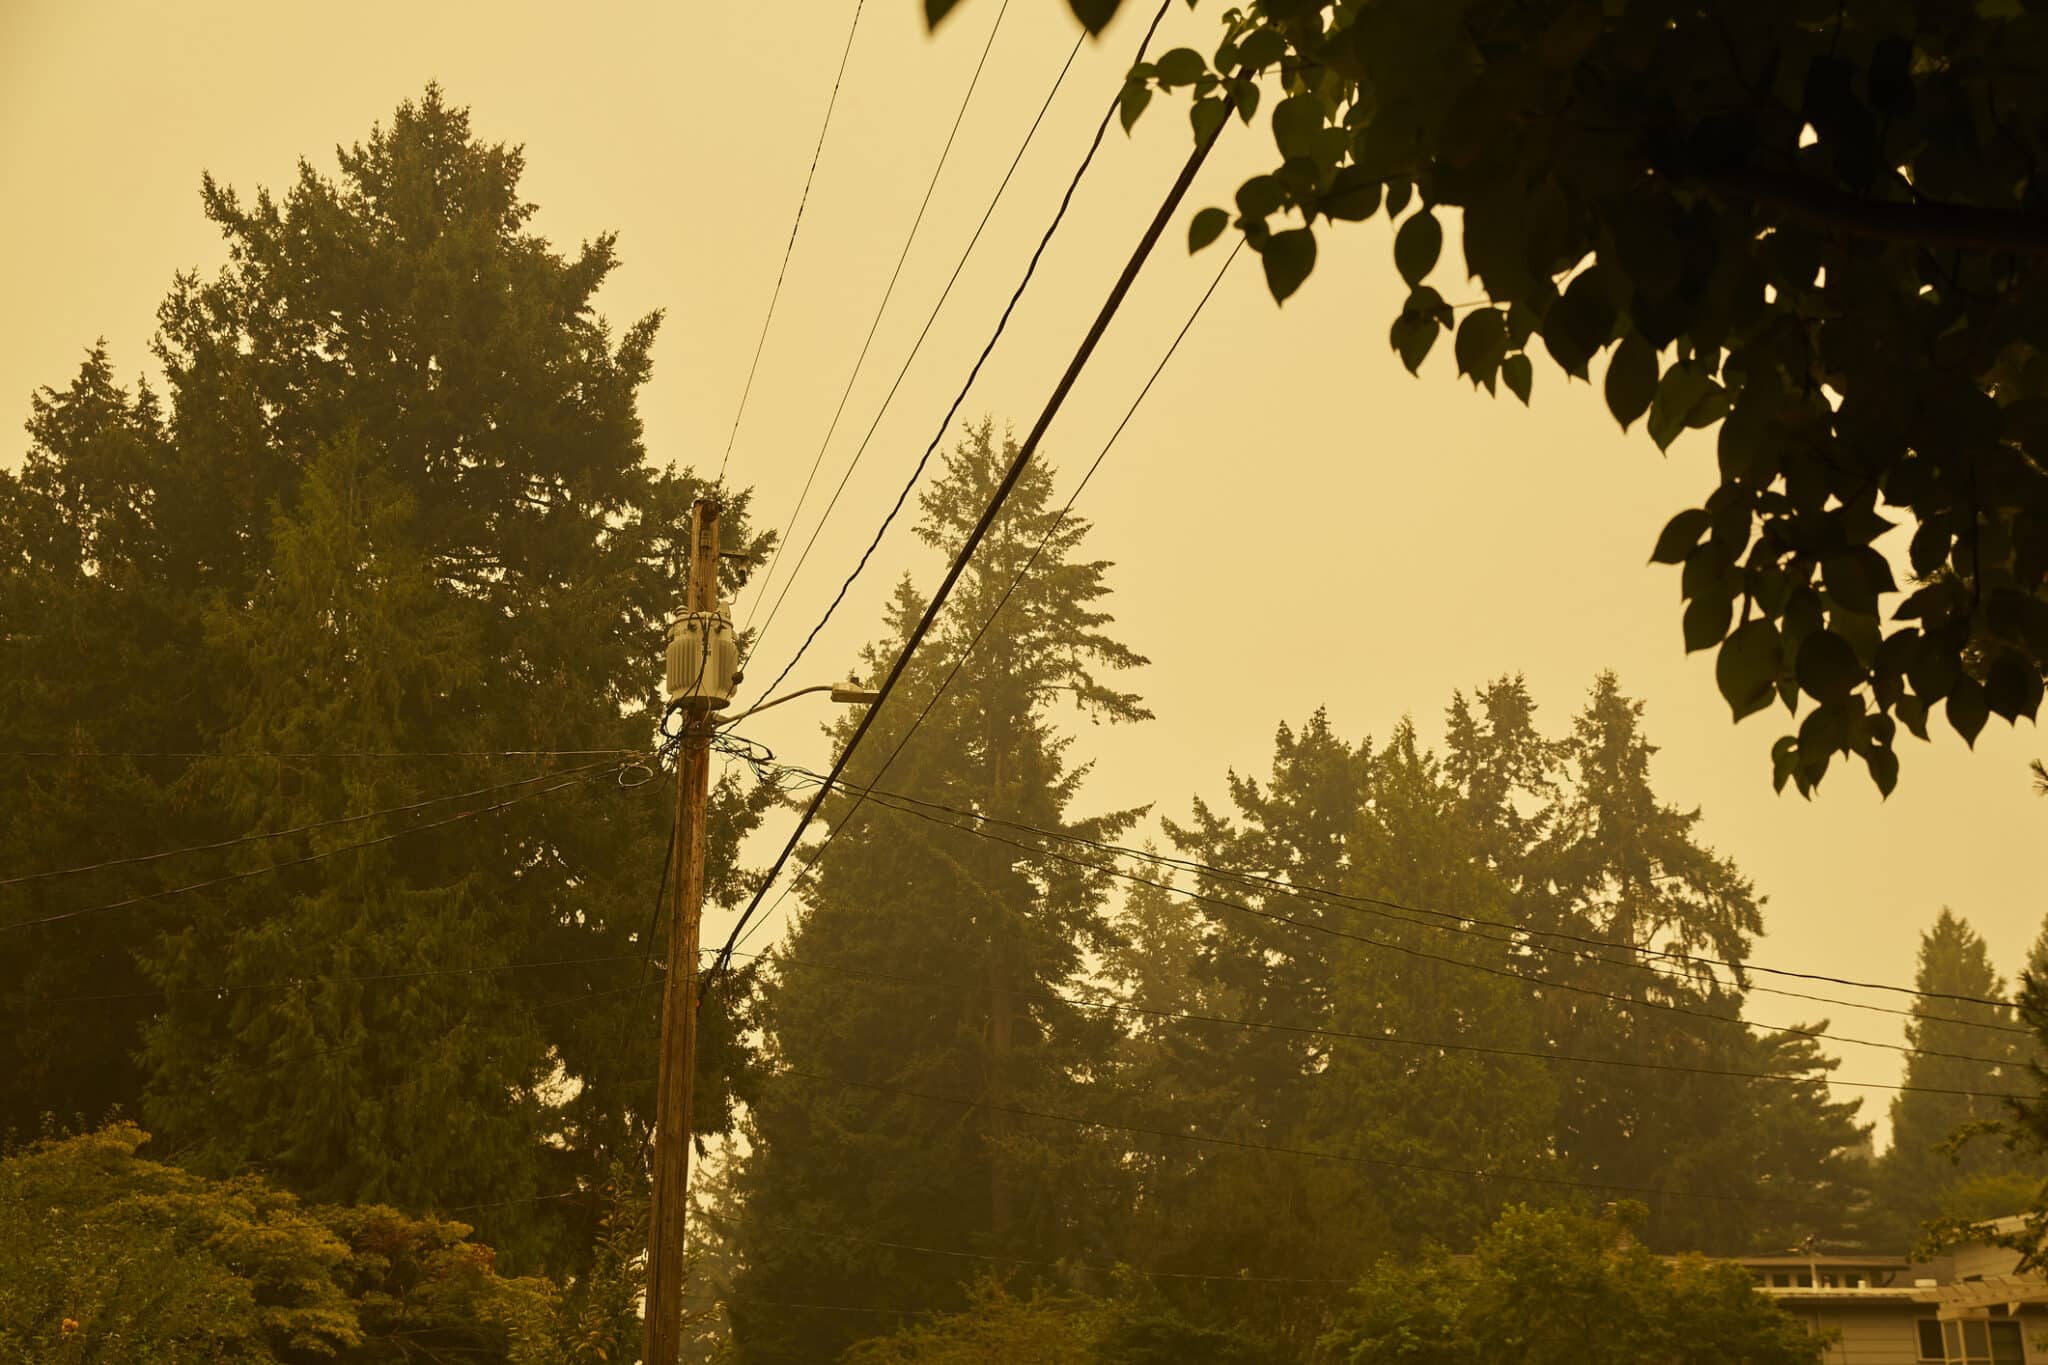 Low angle view of power lines and evergreen trees against a orange smoky sky caused by a wildfire